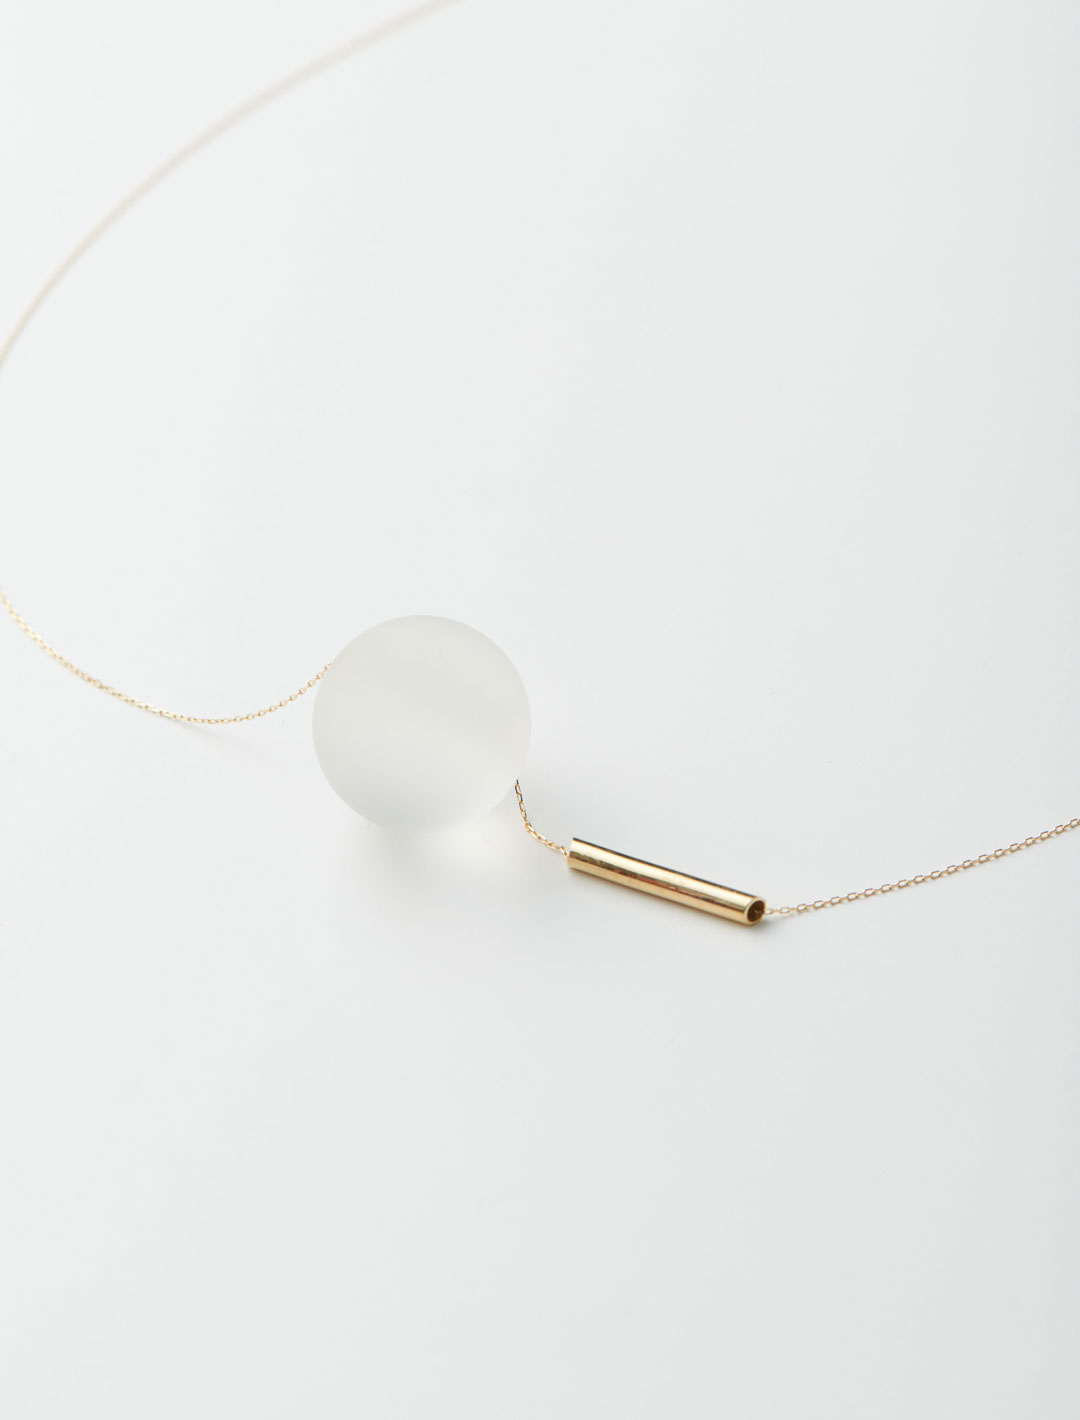 gyoku Necklace M 65cm - Yellow Gold